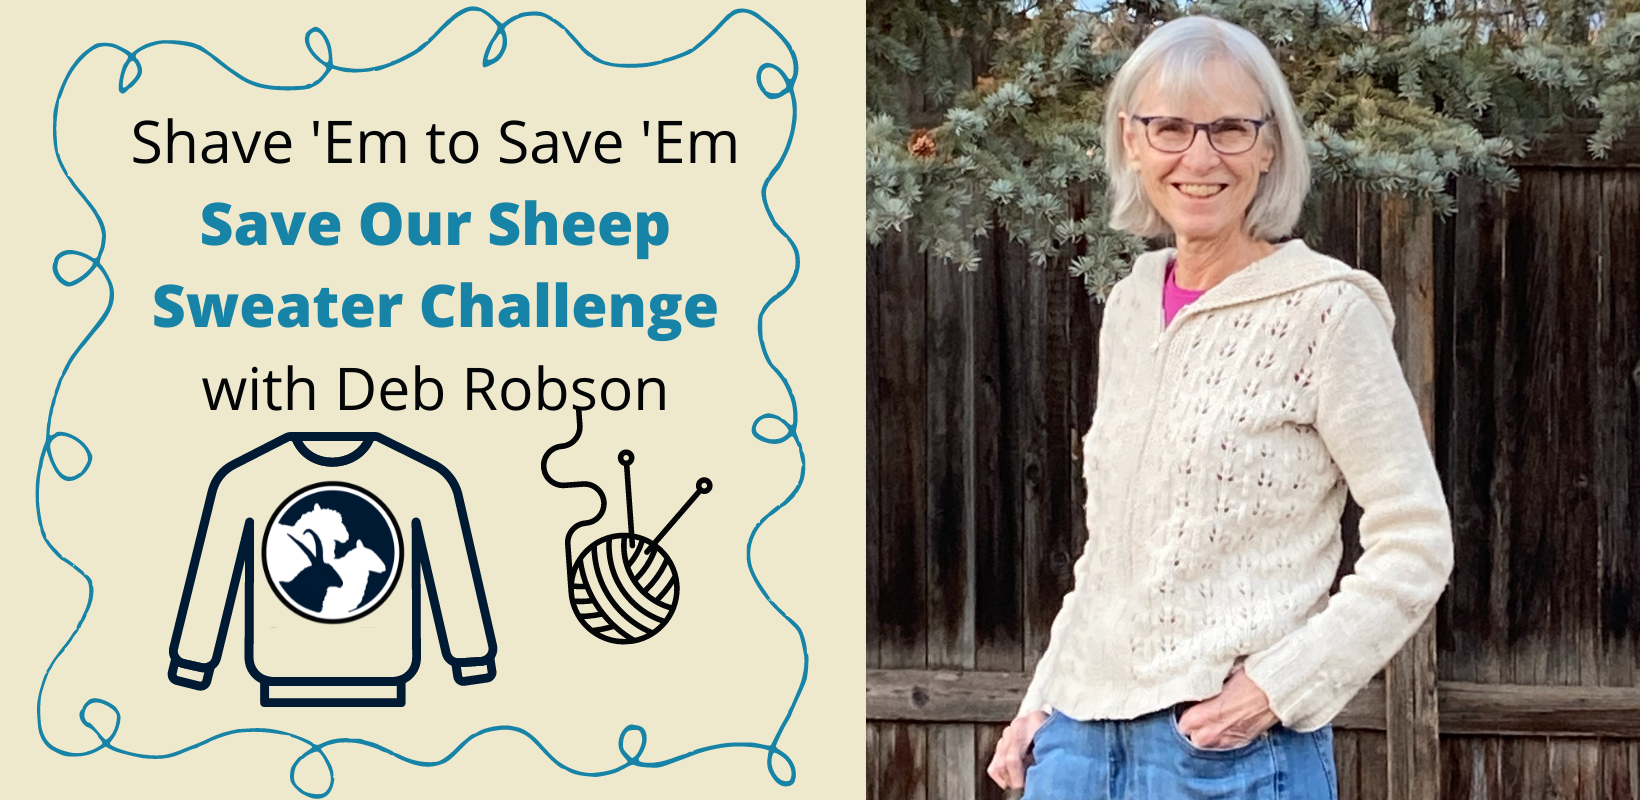 SE2SE Fiber Challenge Save Our Sheep with Deb Robson